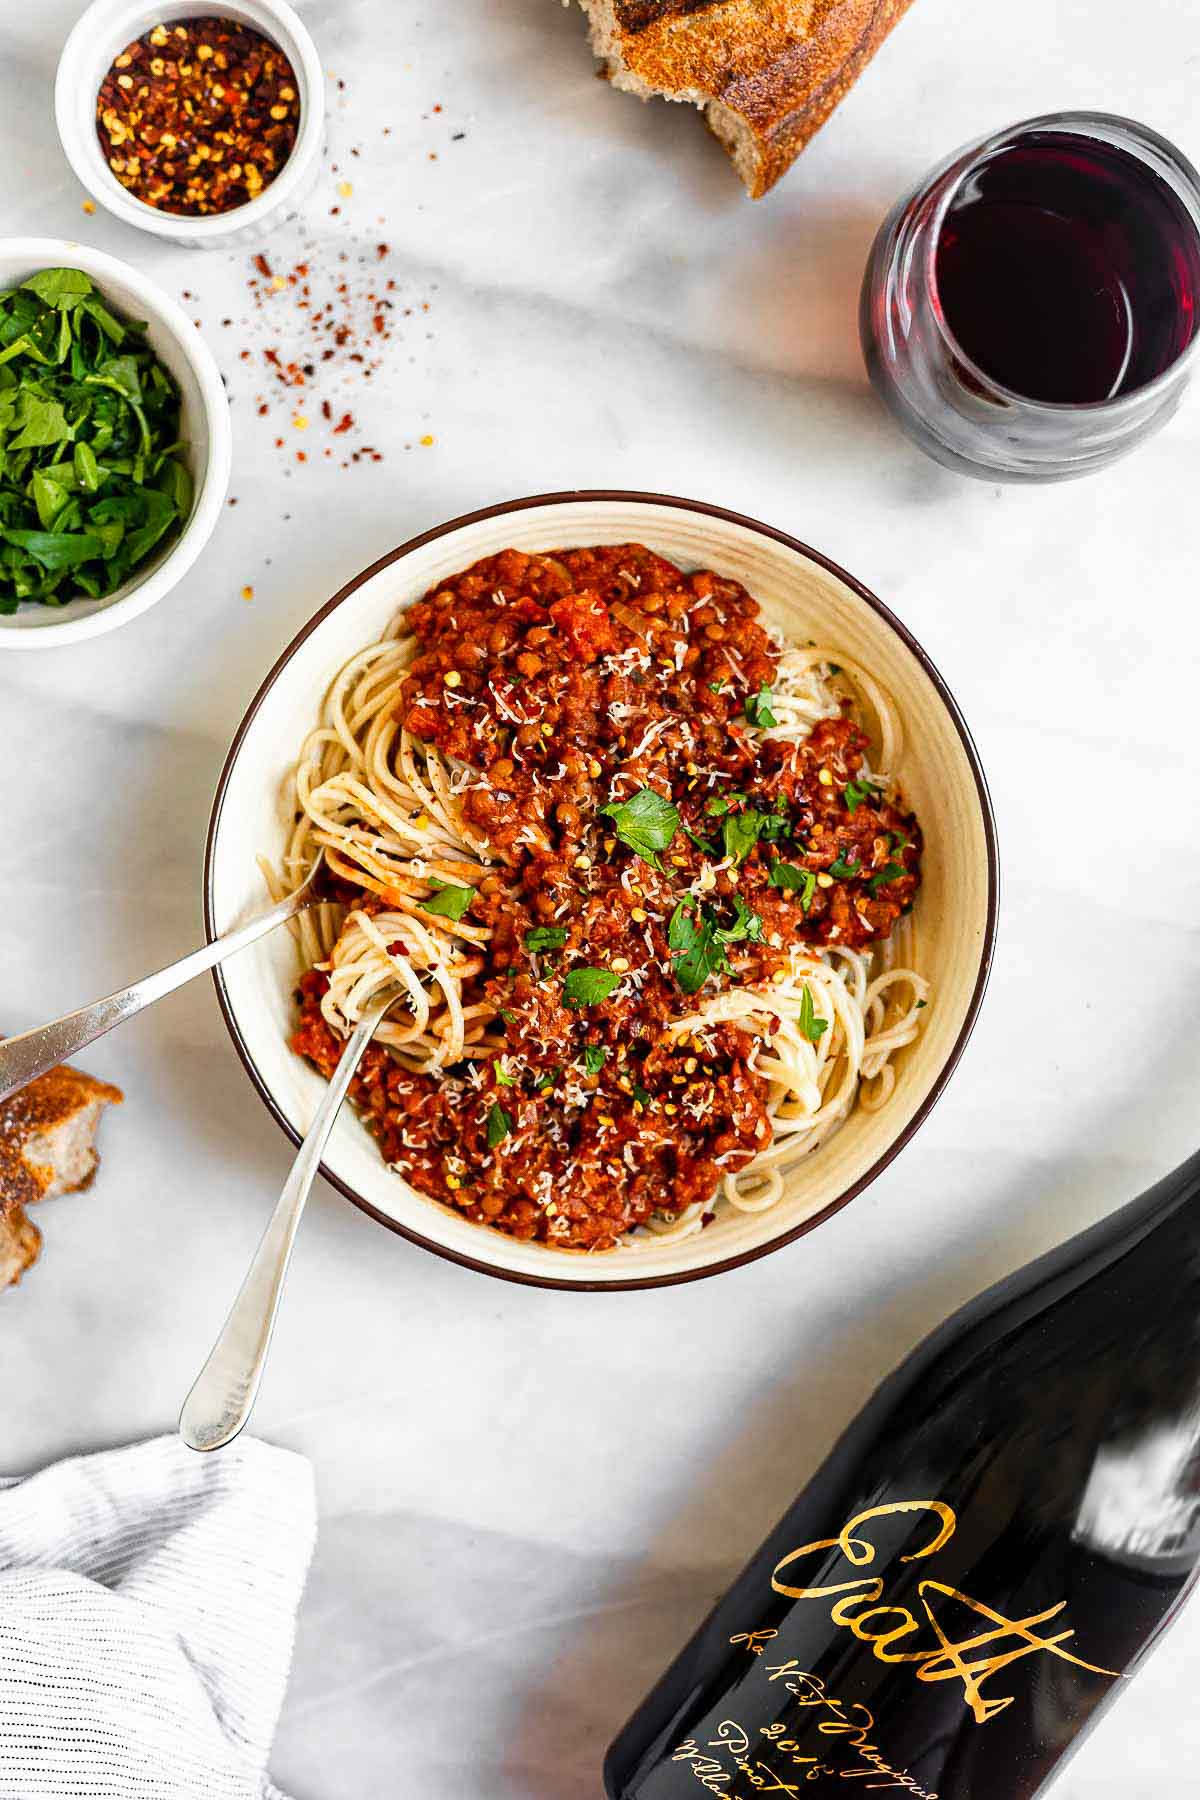 Final bolognese over spaghetti in a bowl with wine on the side.